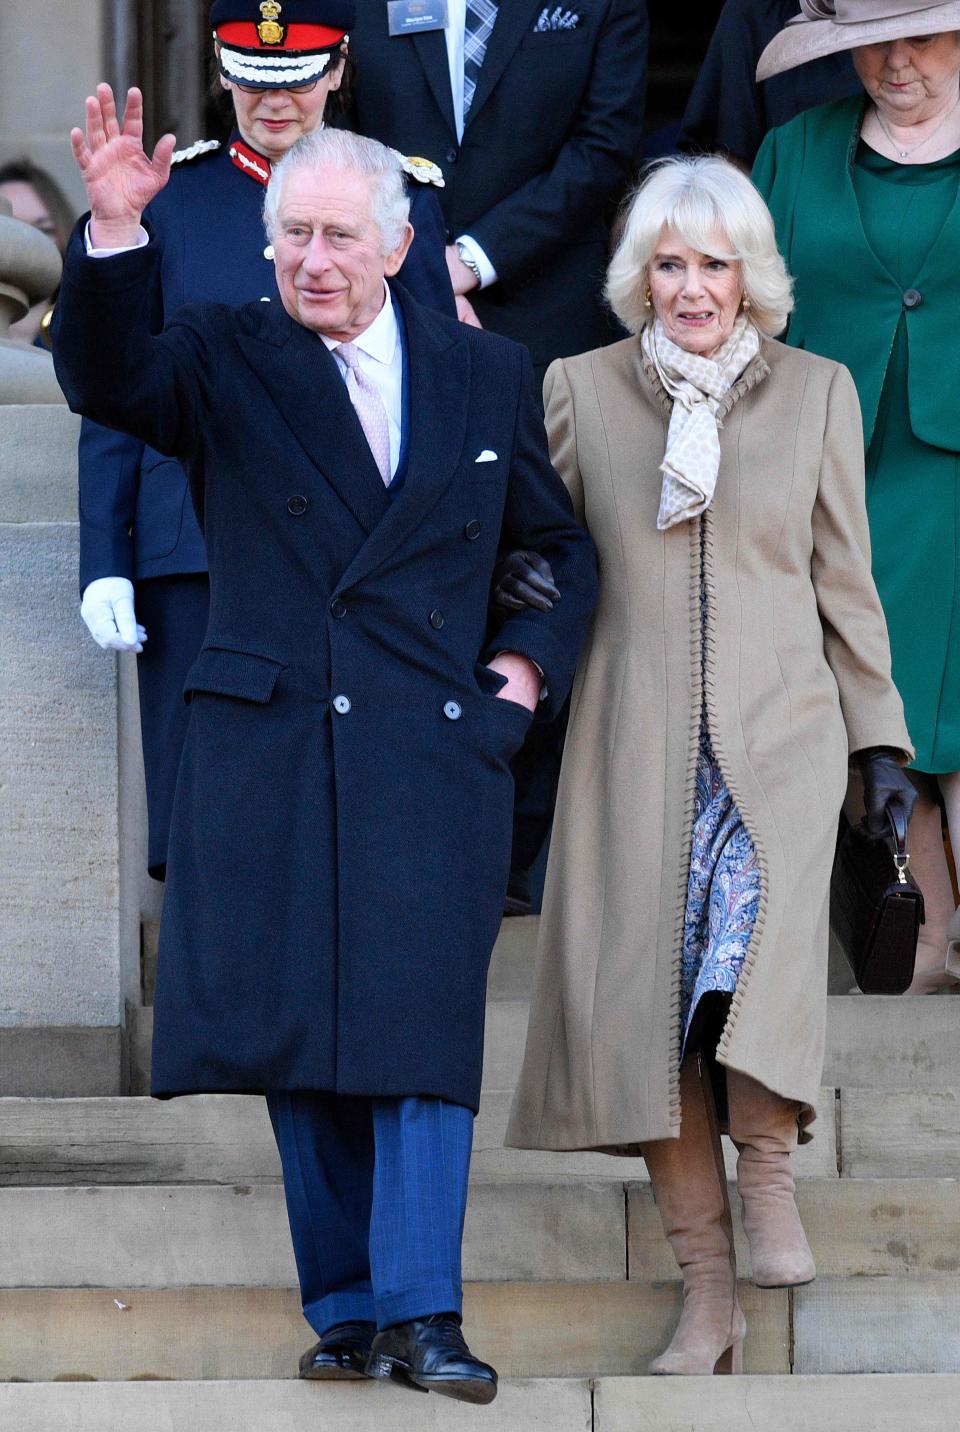 Britain's King Charles III and Britain's Camilla, Queen Consort leave after visiting Bolton Town Hall in Bolton, north west England on January 20, 2023, where they met with representatives from the community. (Photo by Oli SCARFF / AFP) (Photo by OLI SCARFF/AFP via Getty Images) ORIG FILE ID: AFP_337G9JK.jpg